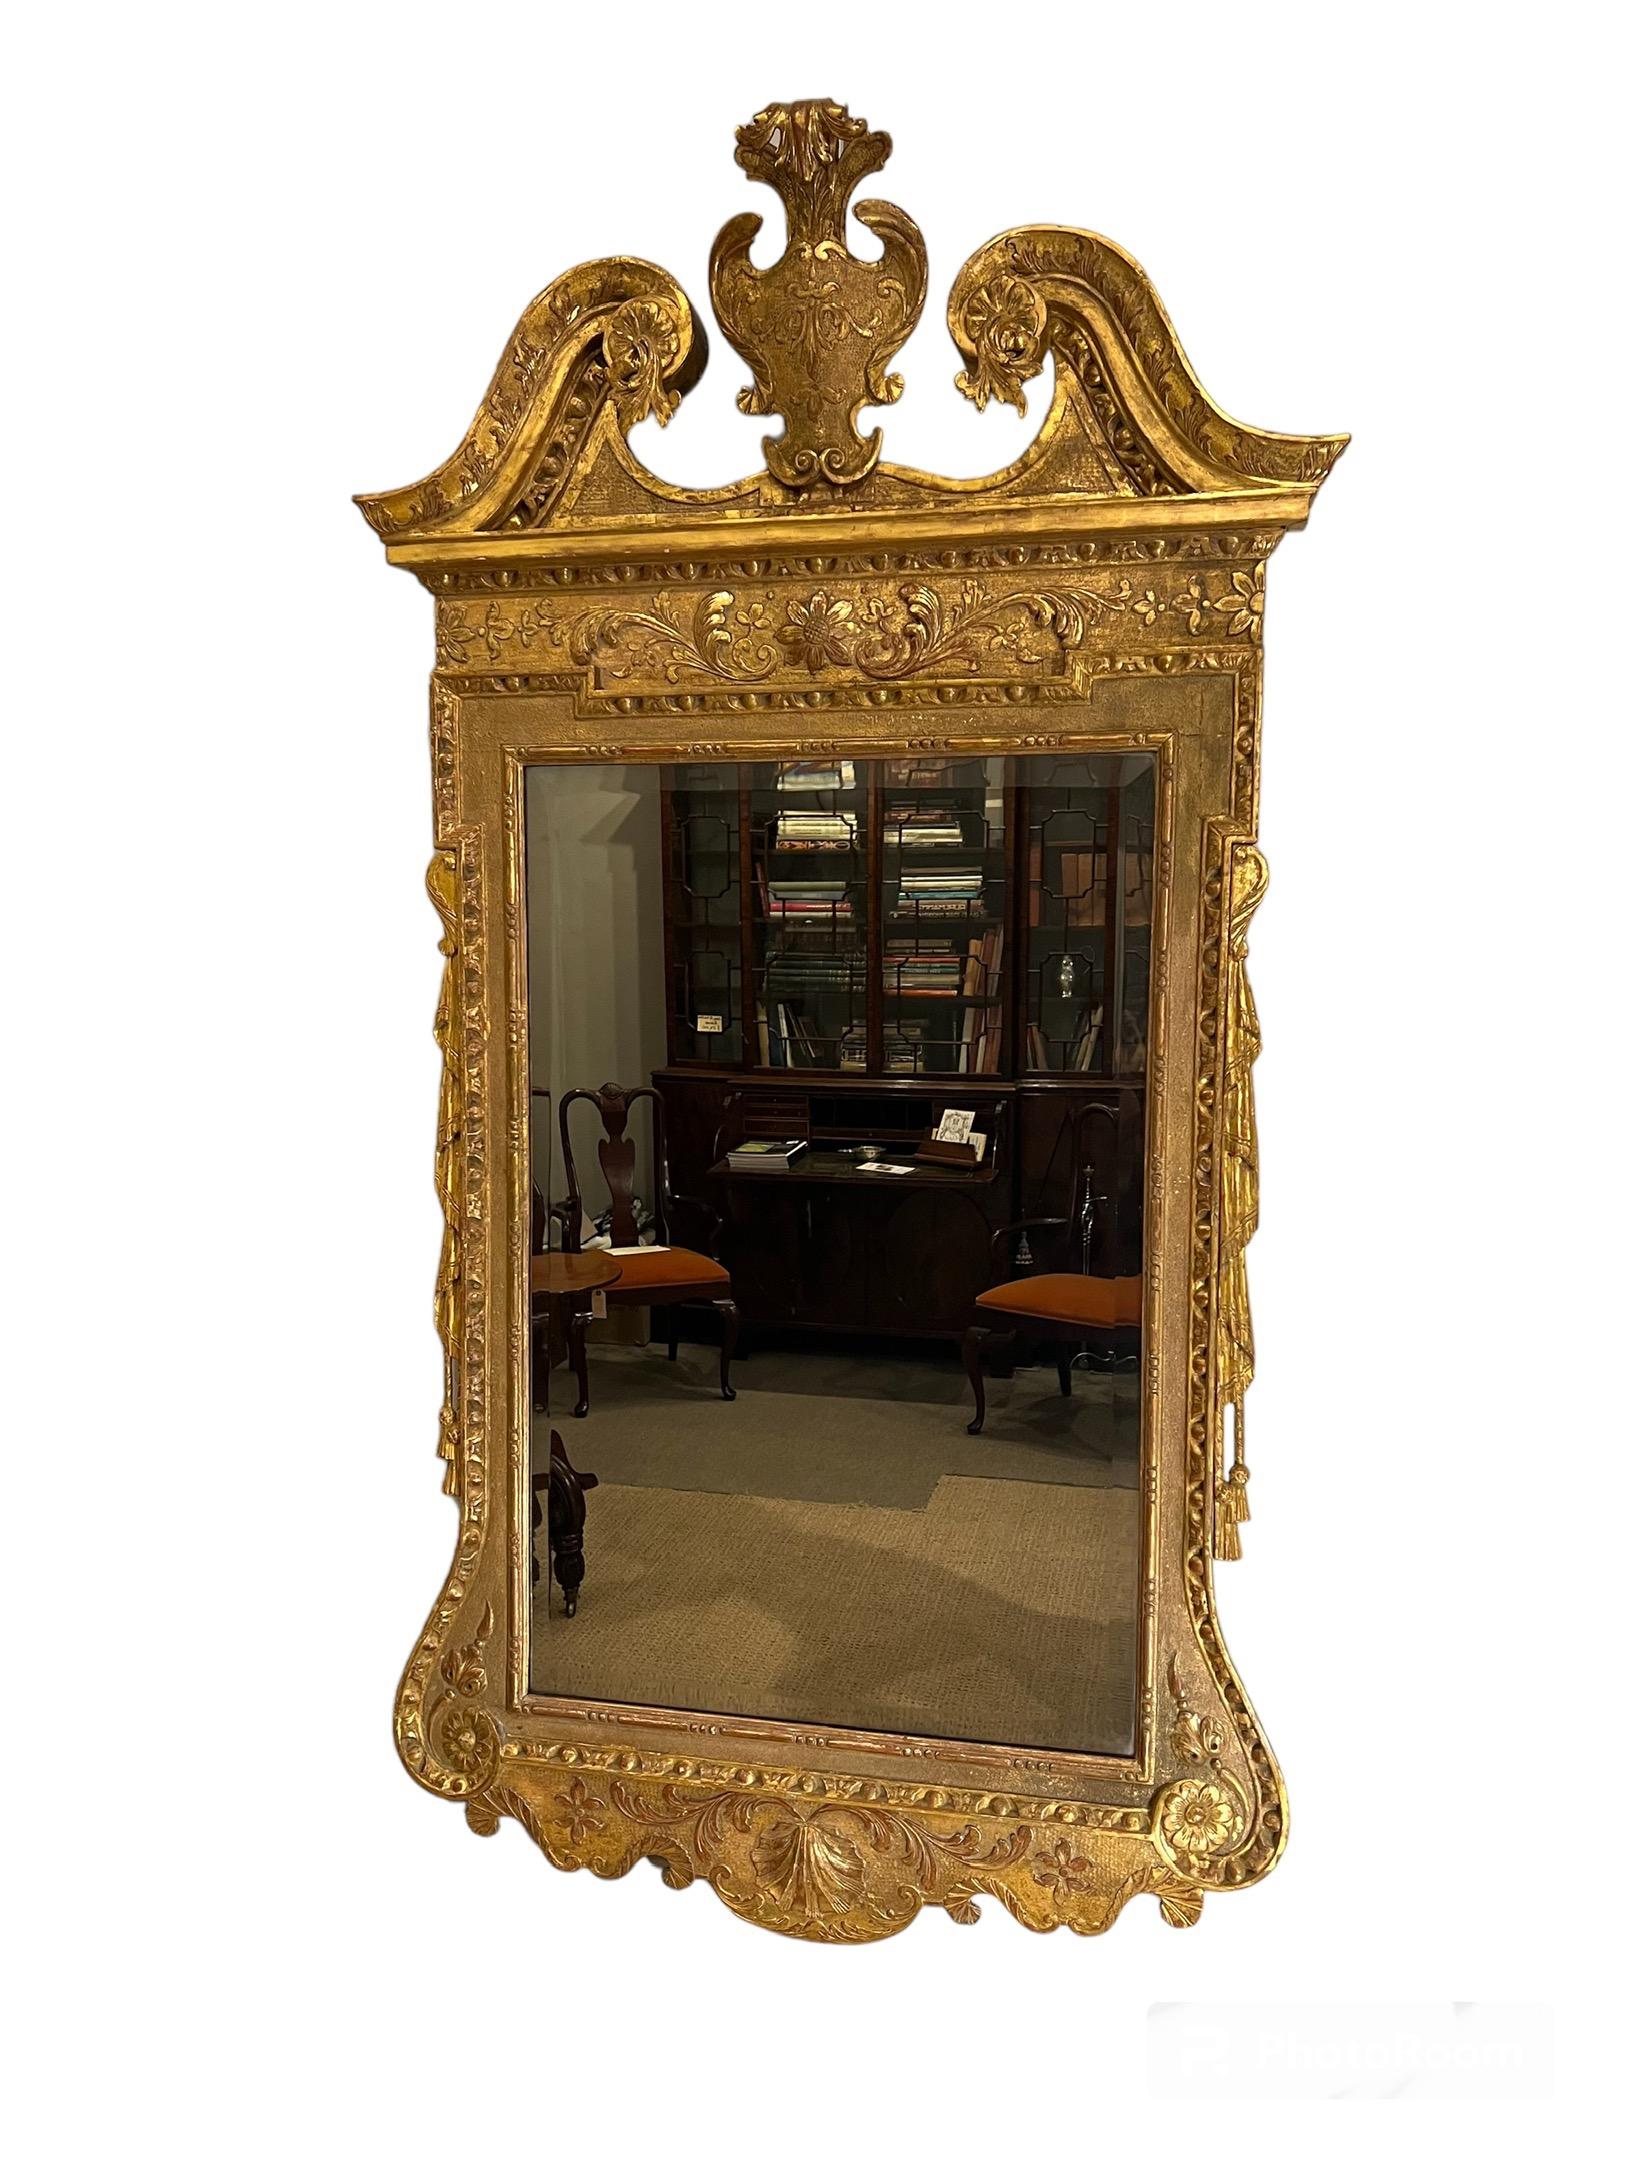 A George II Giltwood Mirror
  With a Rectangular beveled mirror plate in a conforming paneled frame,
Carved with long oolong-&-bead and egg & dart moldings. The broken arch pediment carved with acanthus leaf on a punched a punched ground and egg and